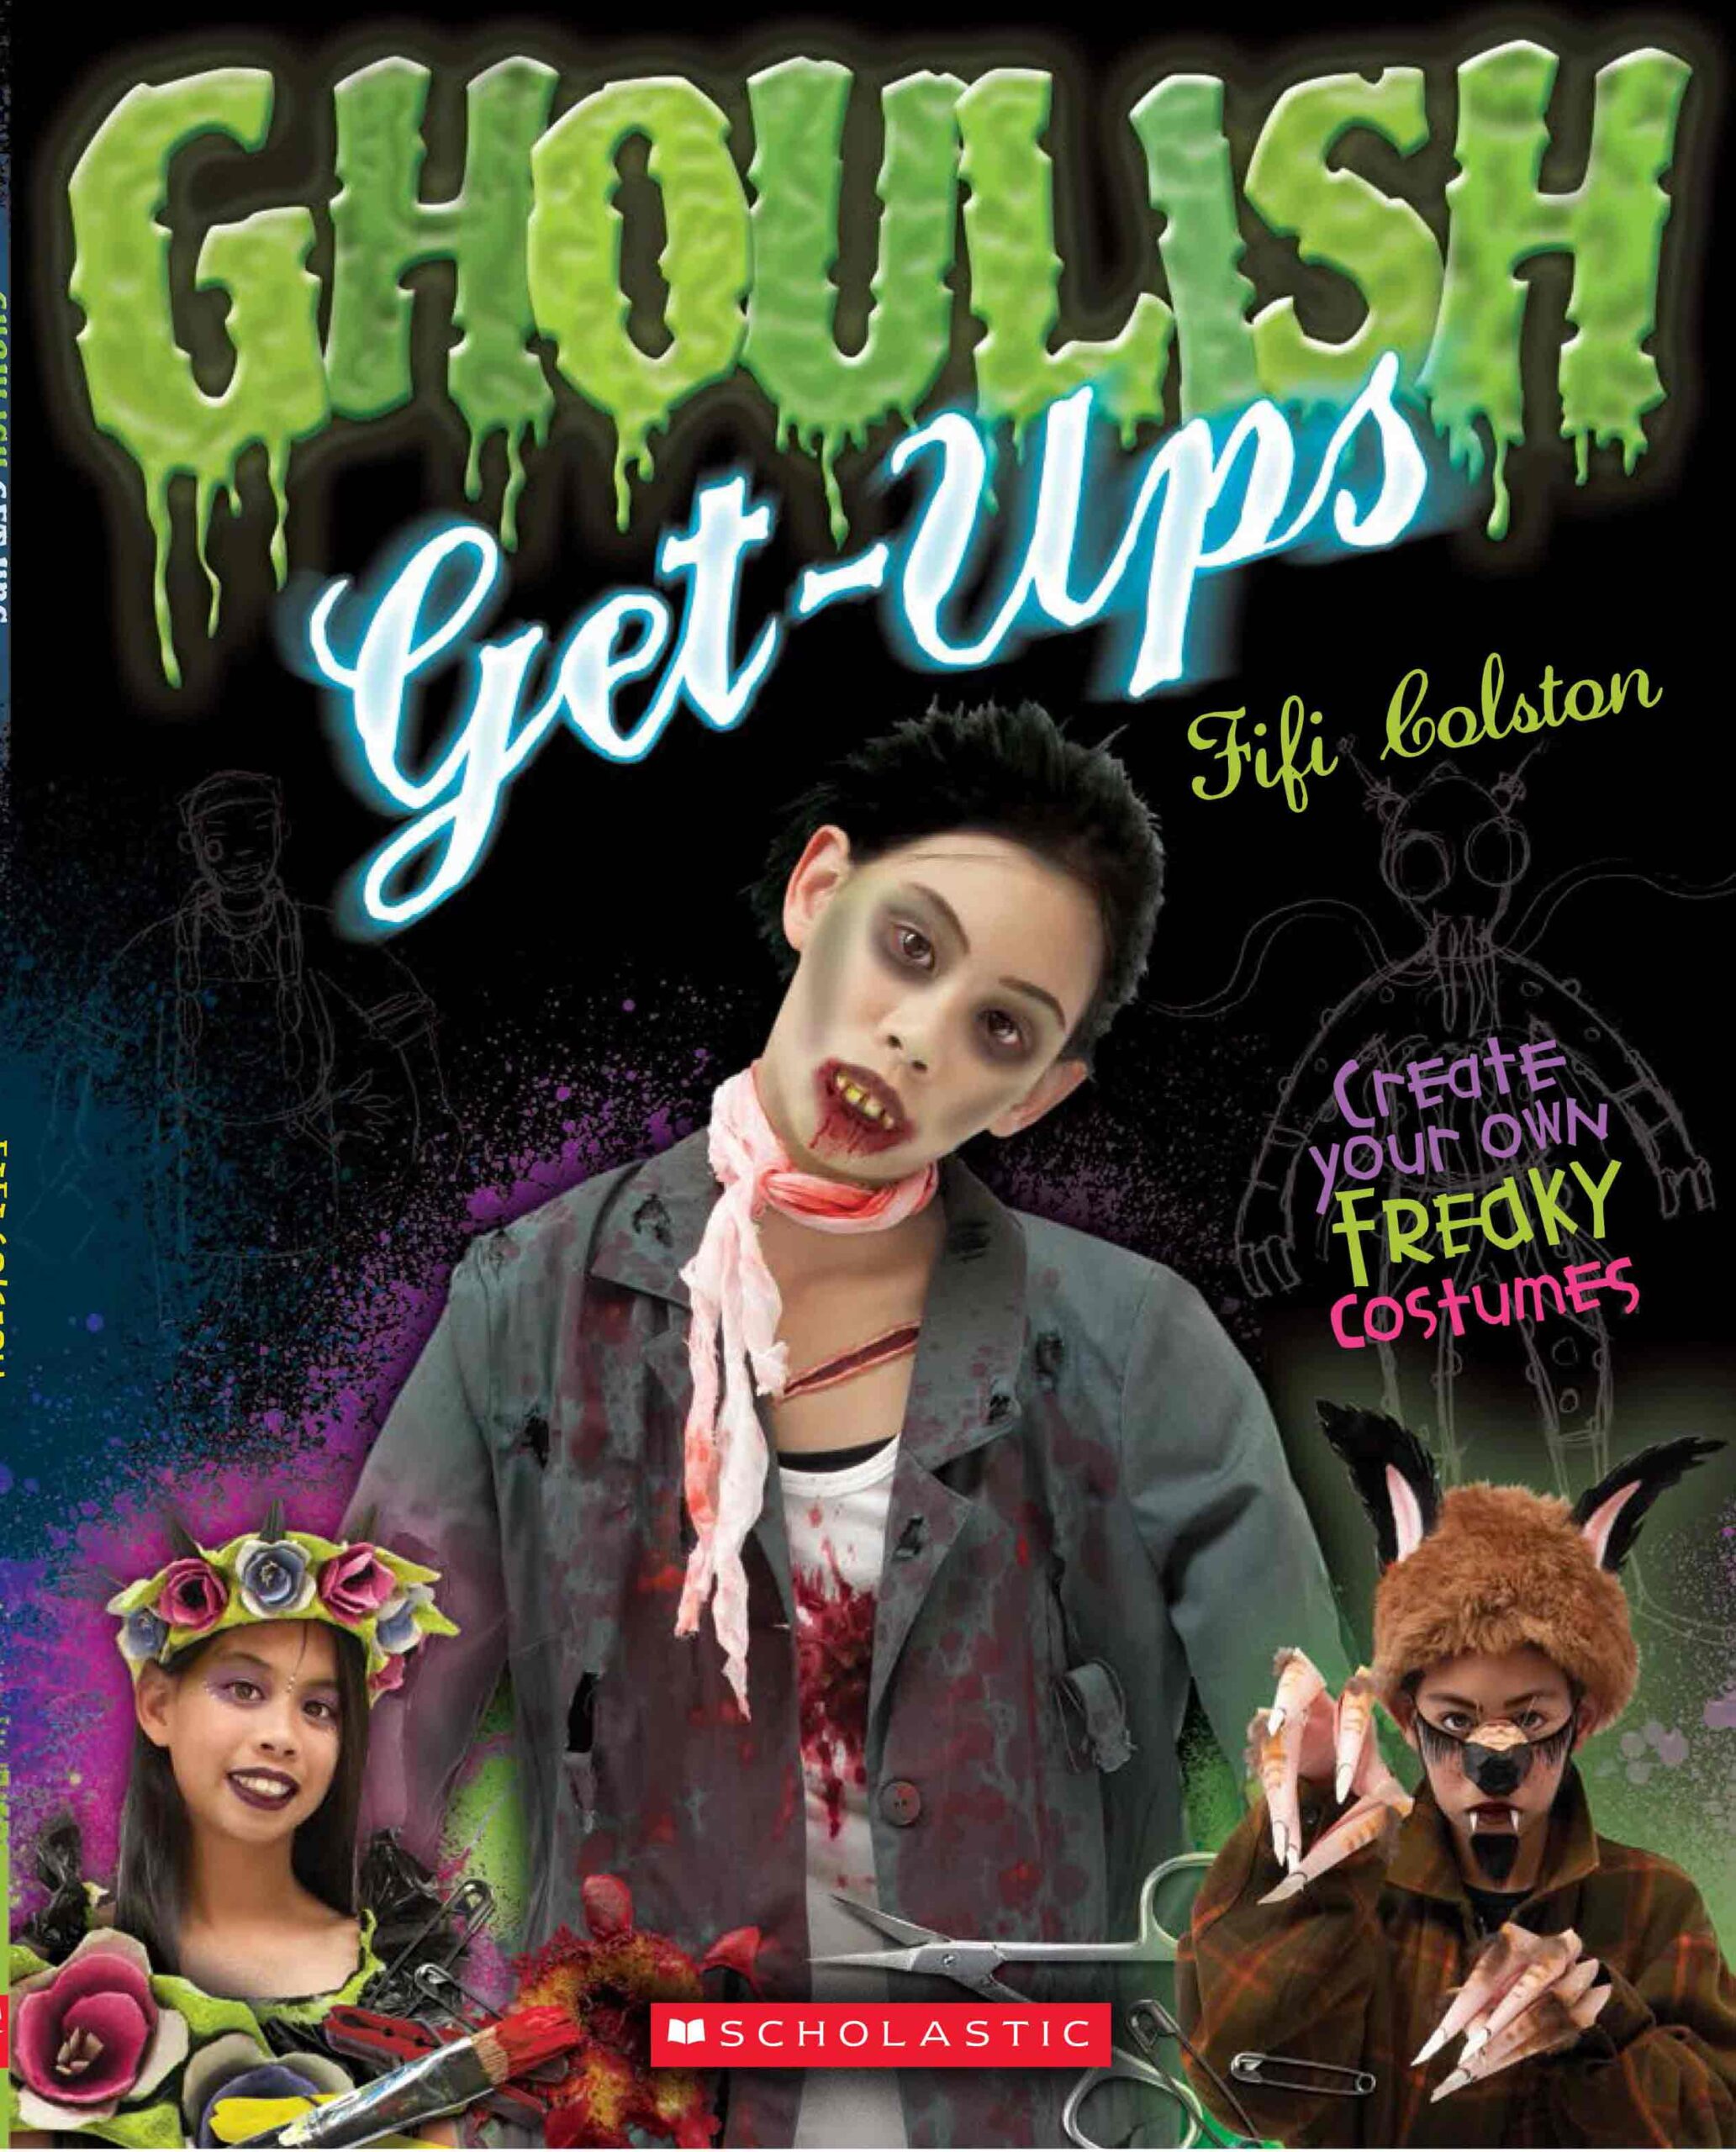 GhoulishGetUps: Image of the cover of the book “Ghoulish Get-Ups”.